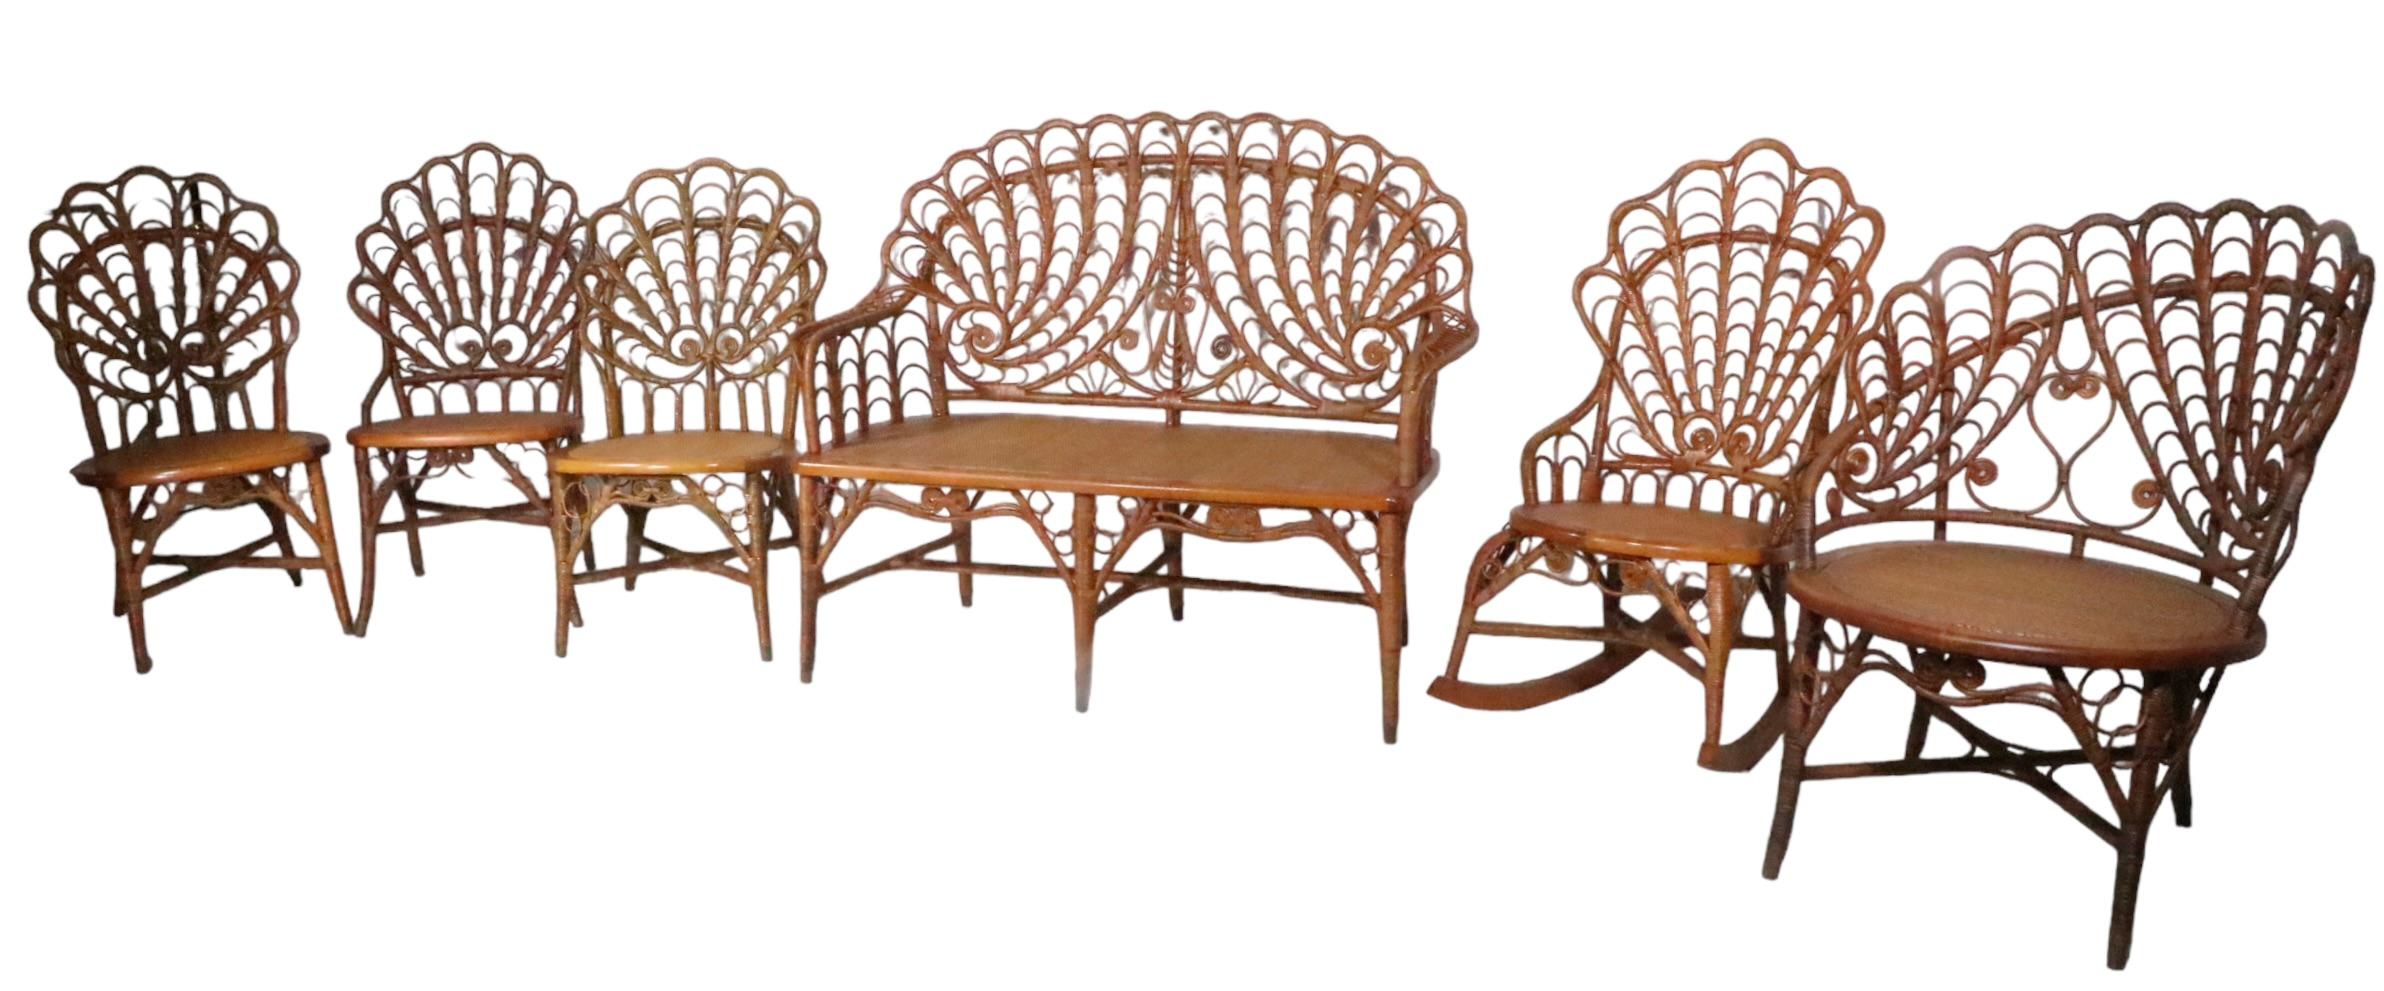 6 Pc. Set Ornate Antique Wicker by Heywood Brothers c 1890's  For Sale 2